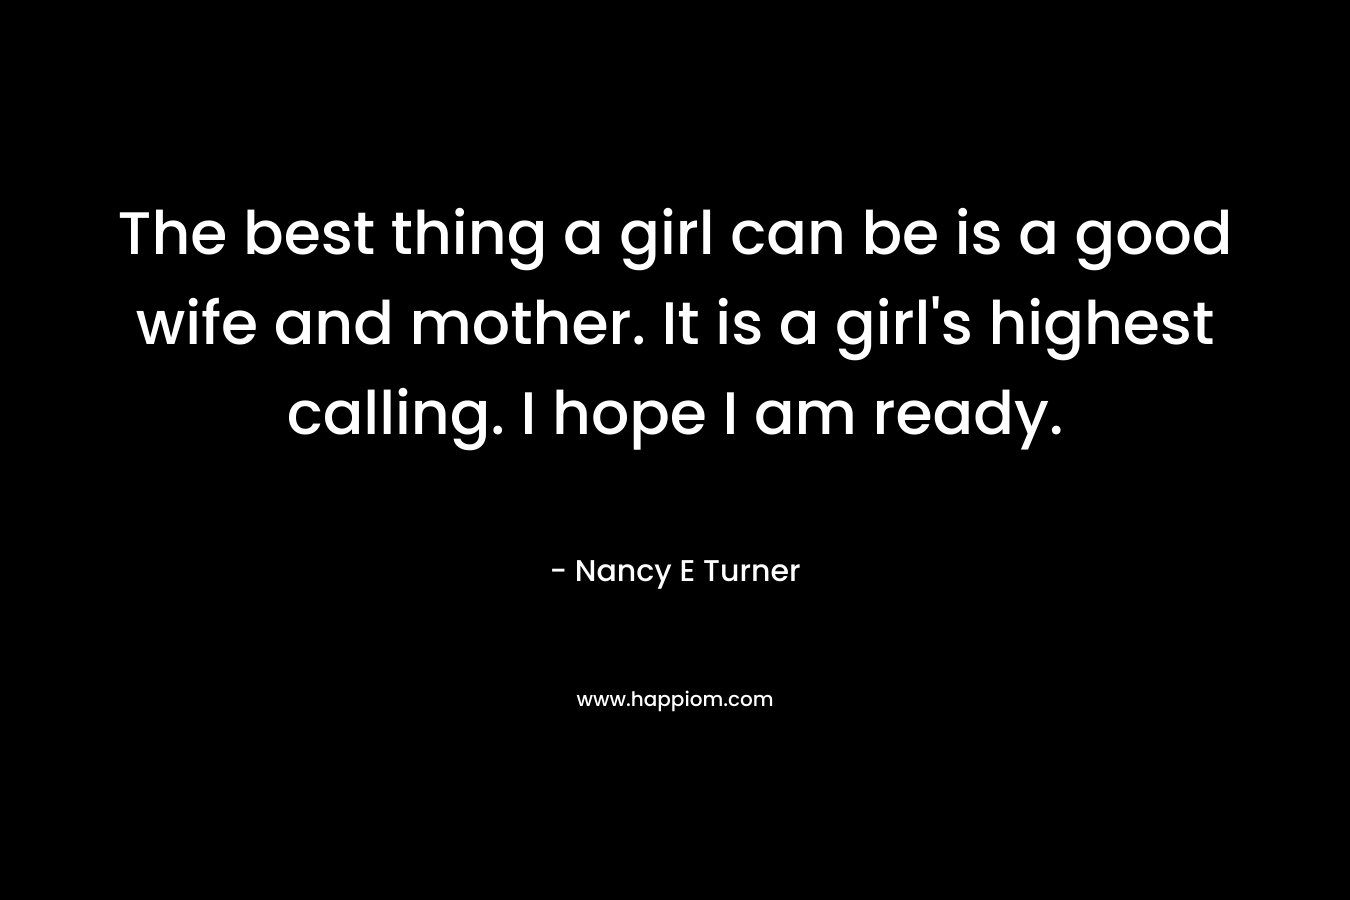 The best thing a girl can be is a good wife and mother. It is a girl's highest calling. I hope I am ready.